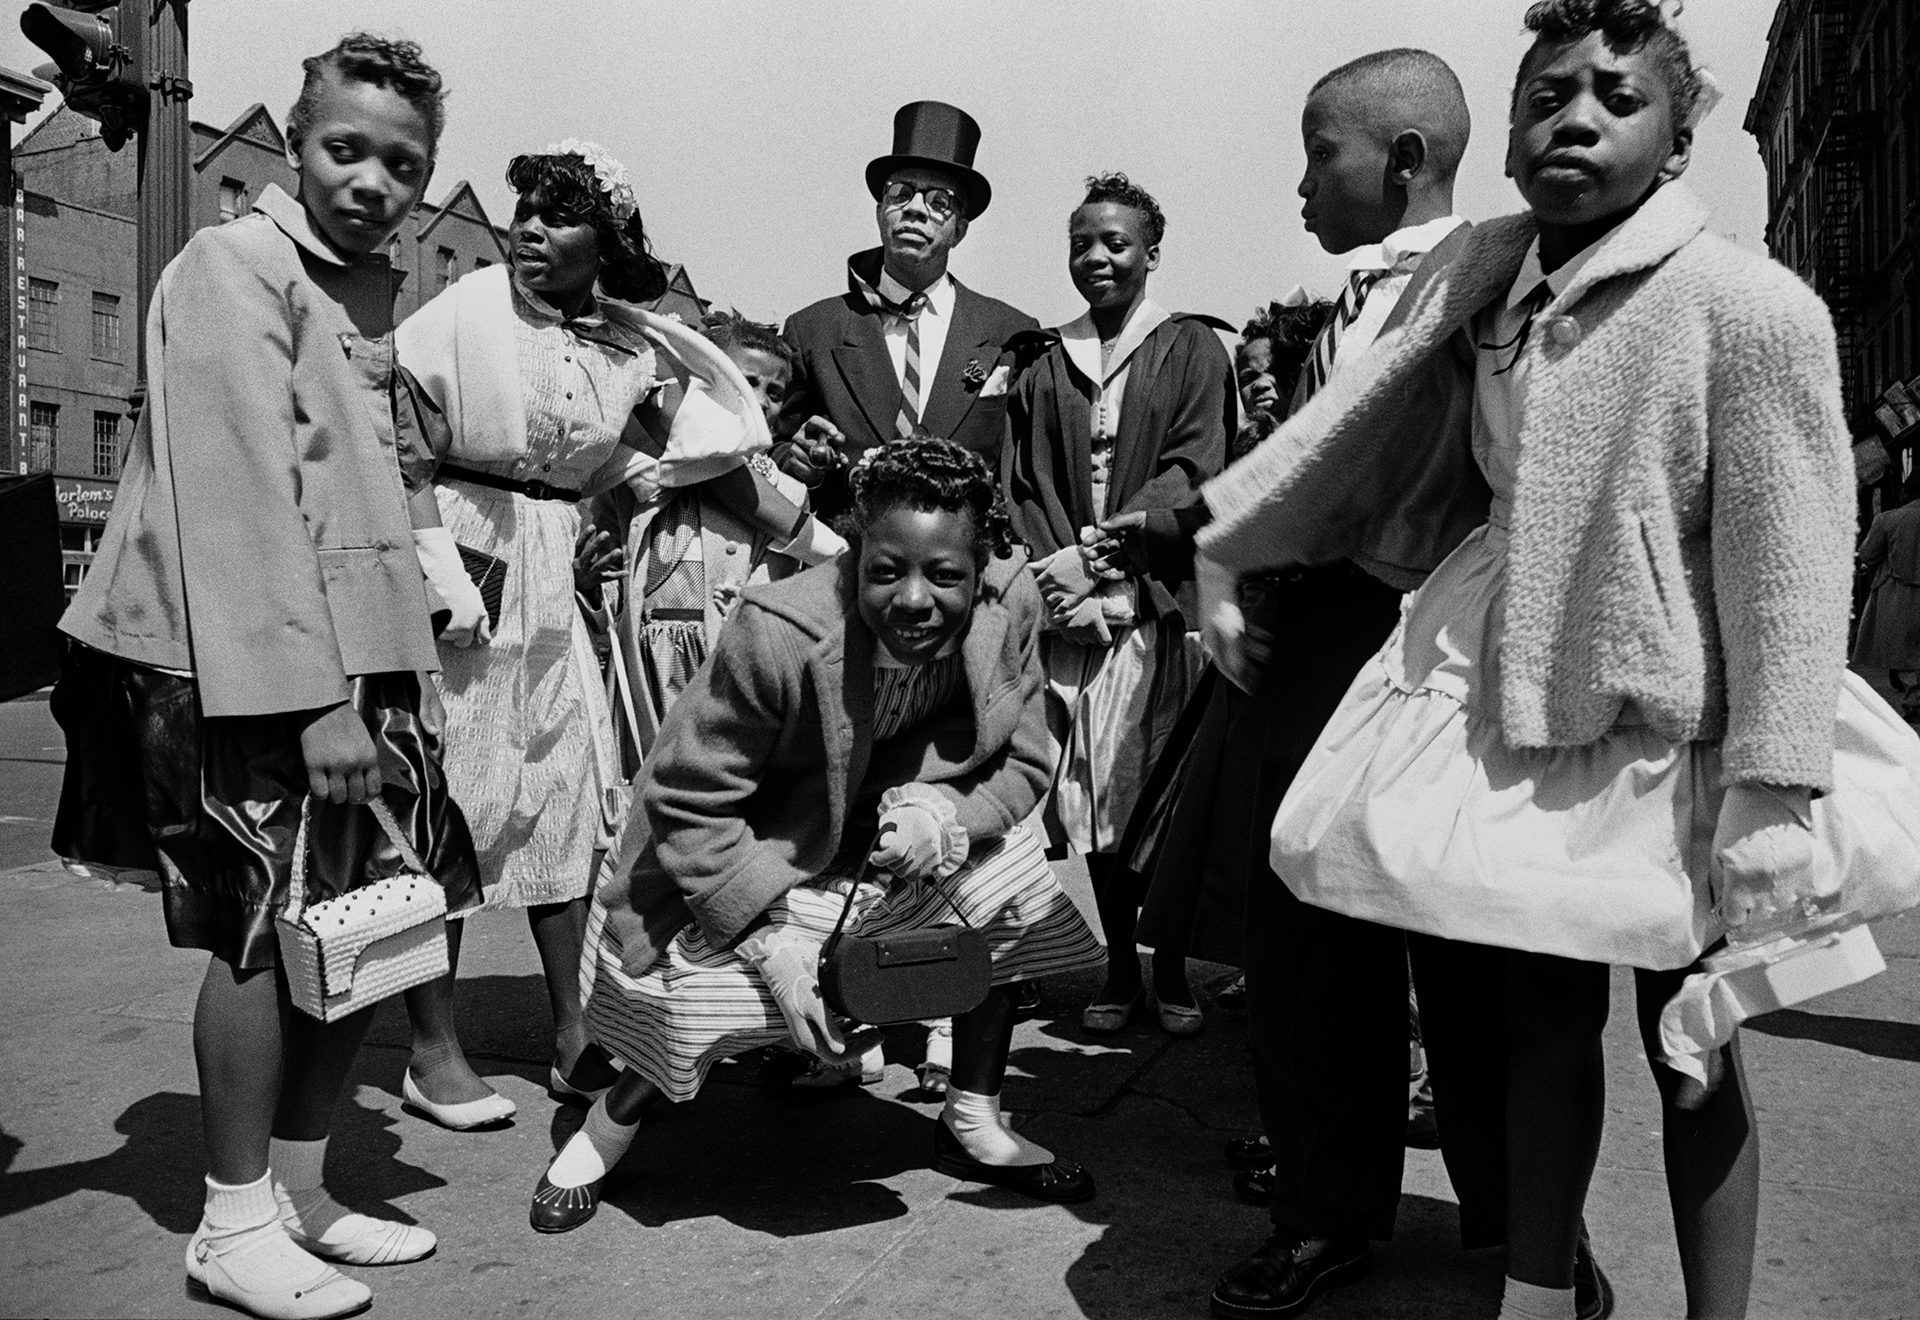 Photograph of people on Easter Sunday in 1955, as part of the new William Klein exhibition called YES at the ICP